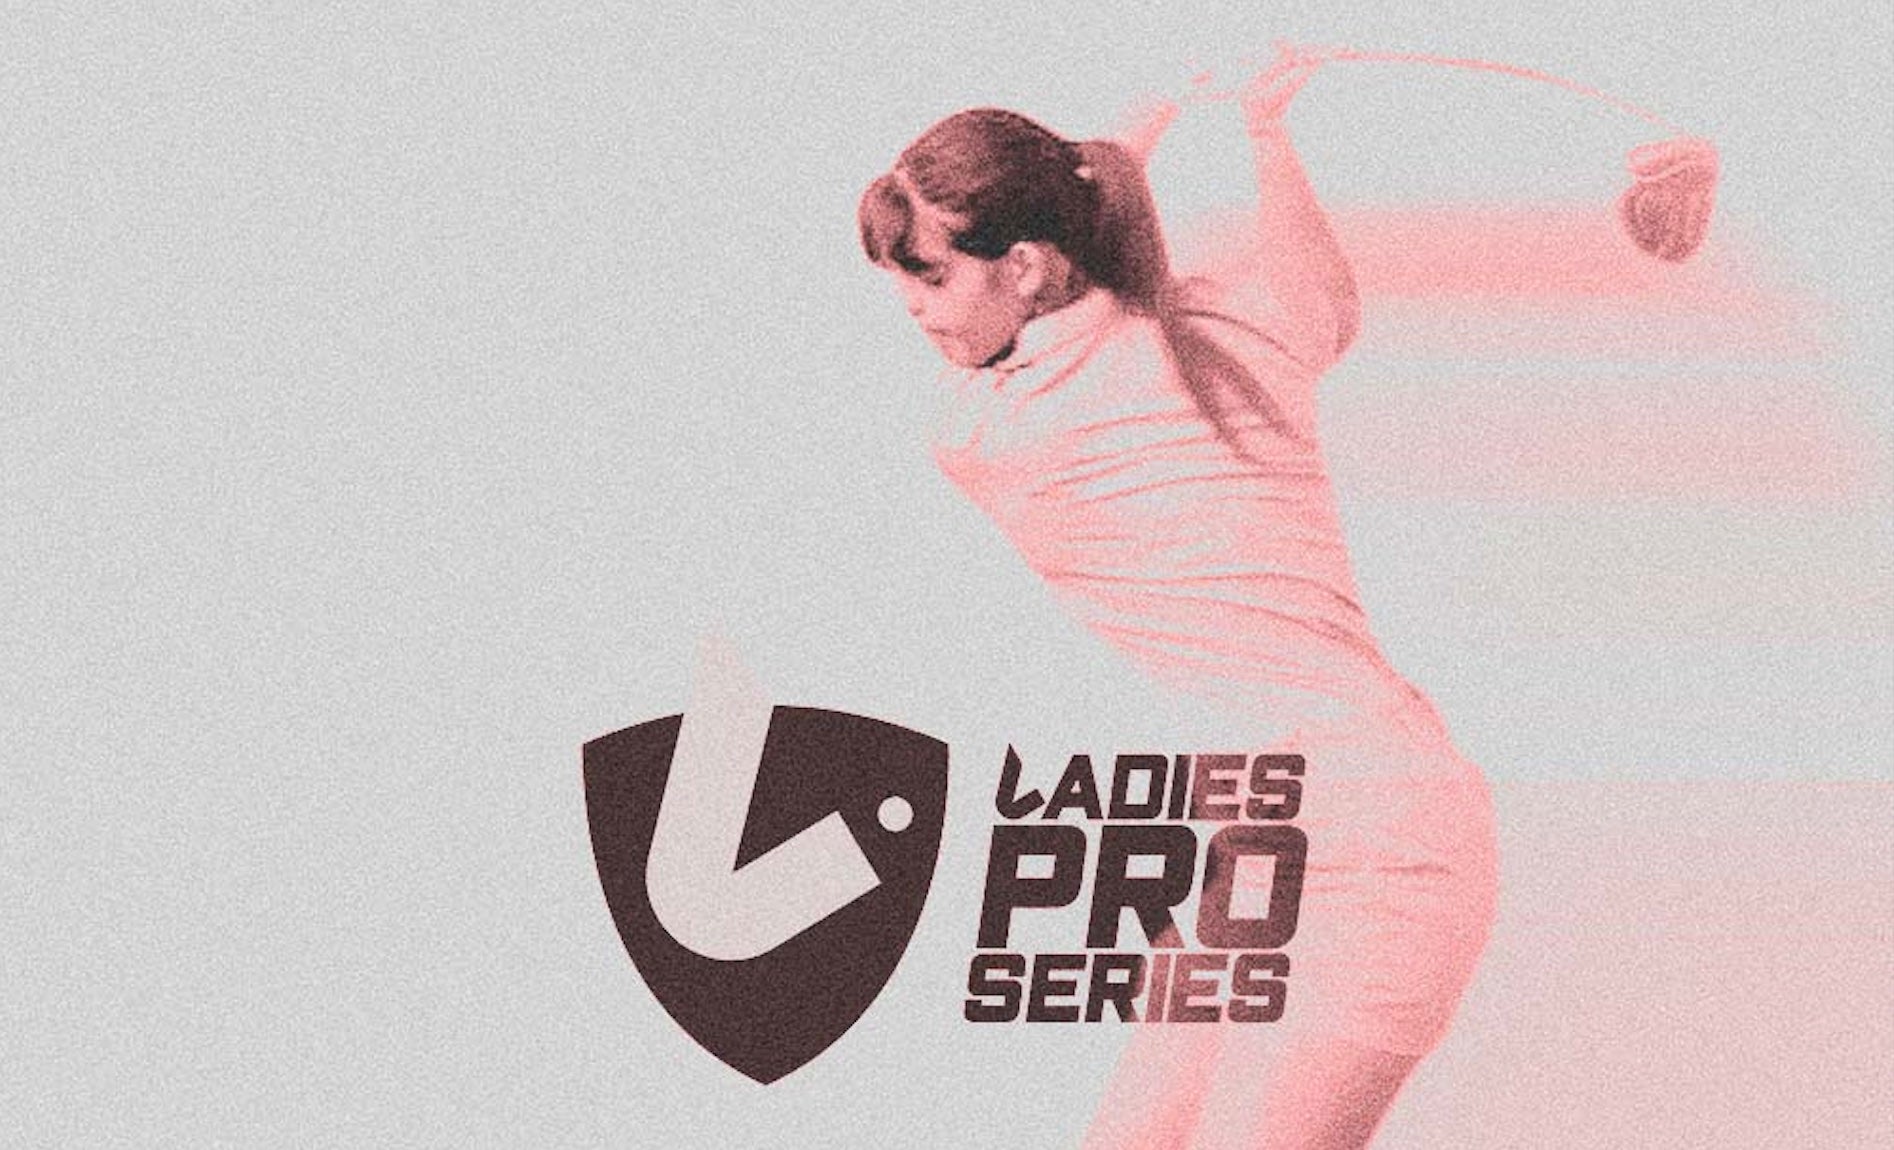 New professional women’s tour launches in the UK